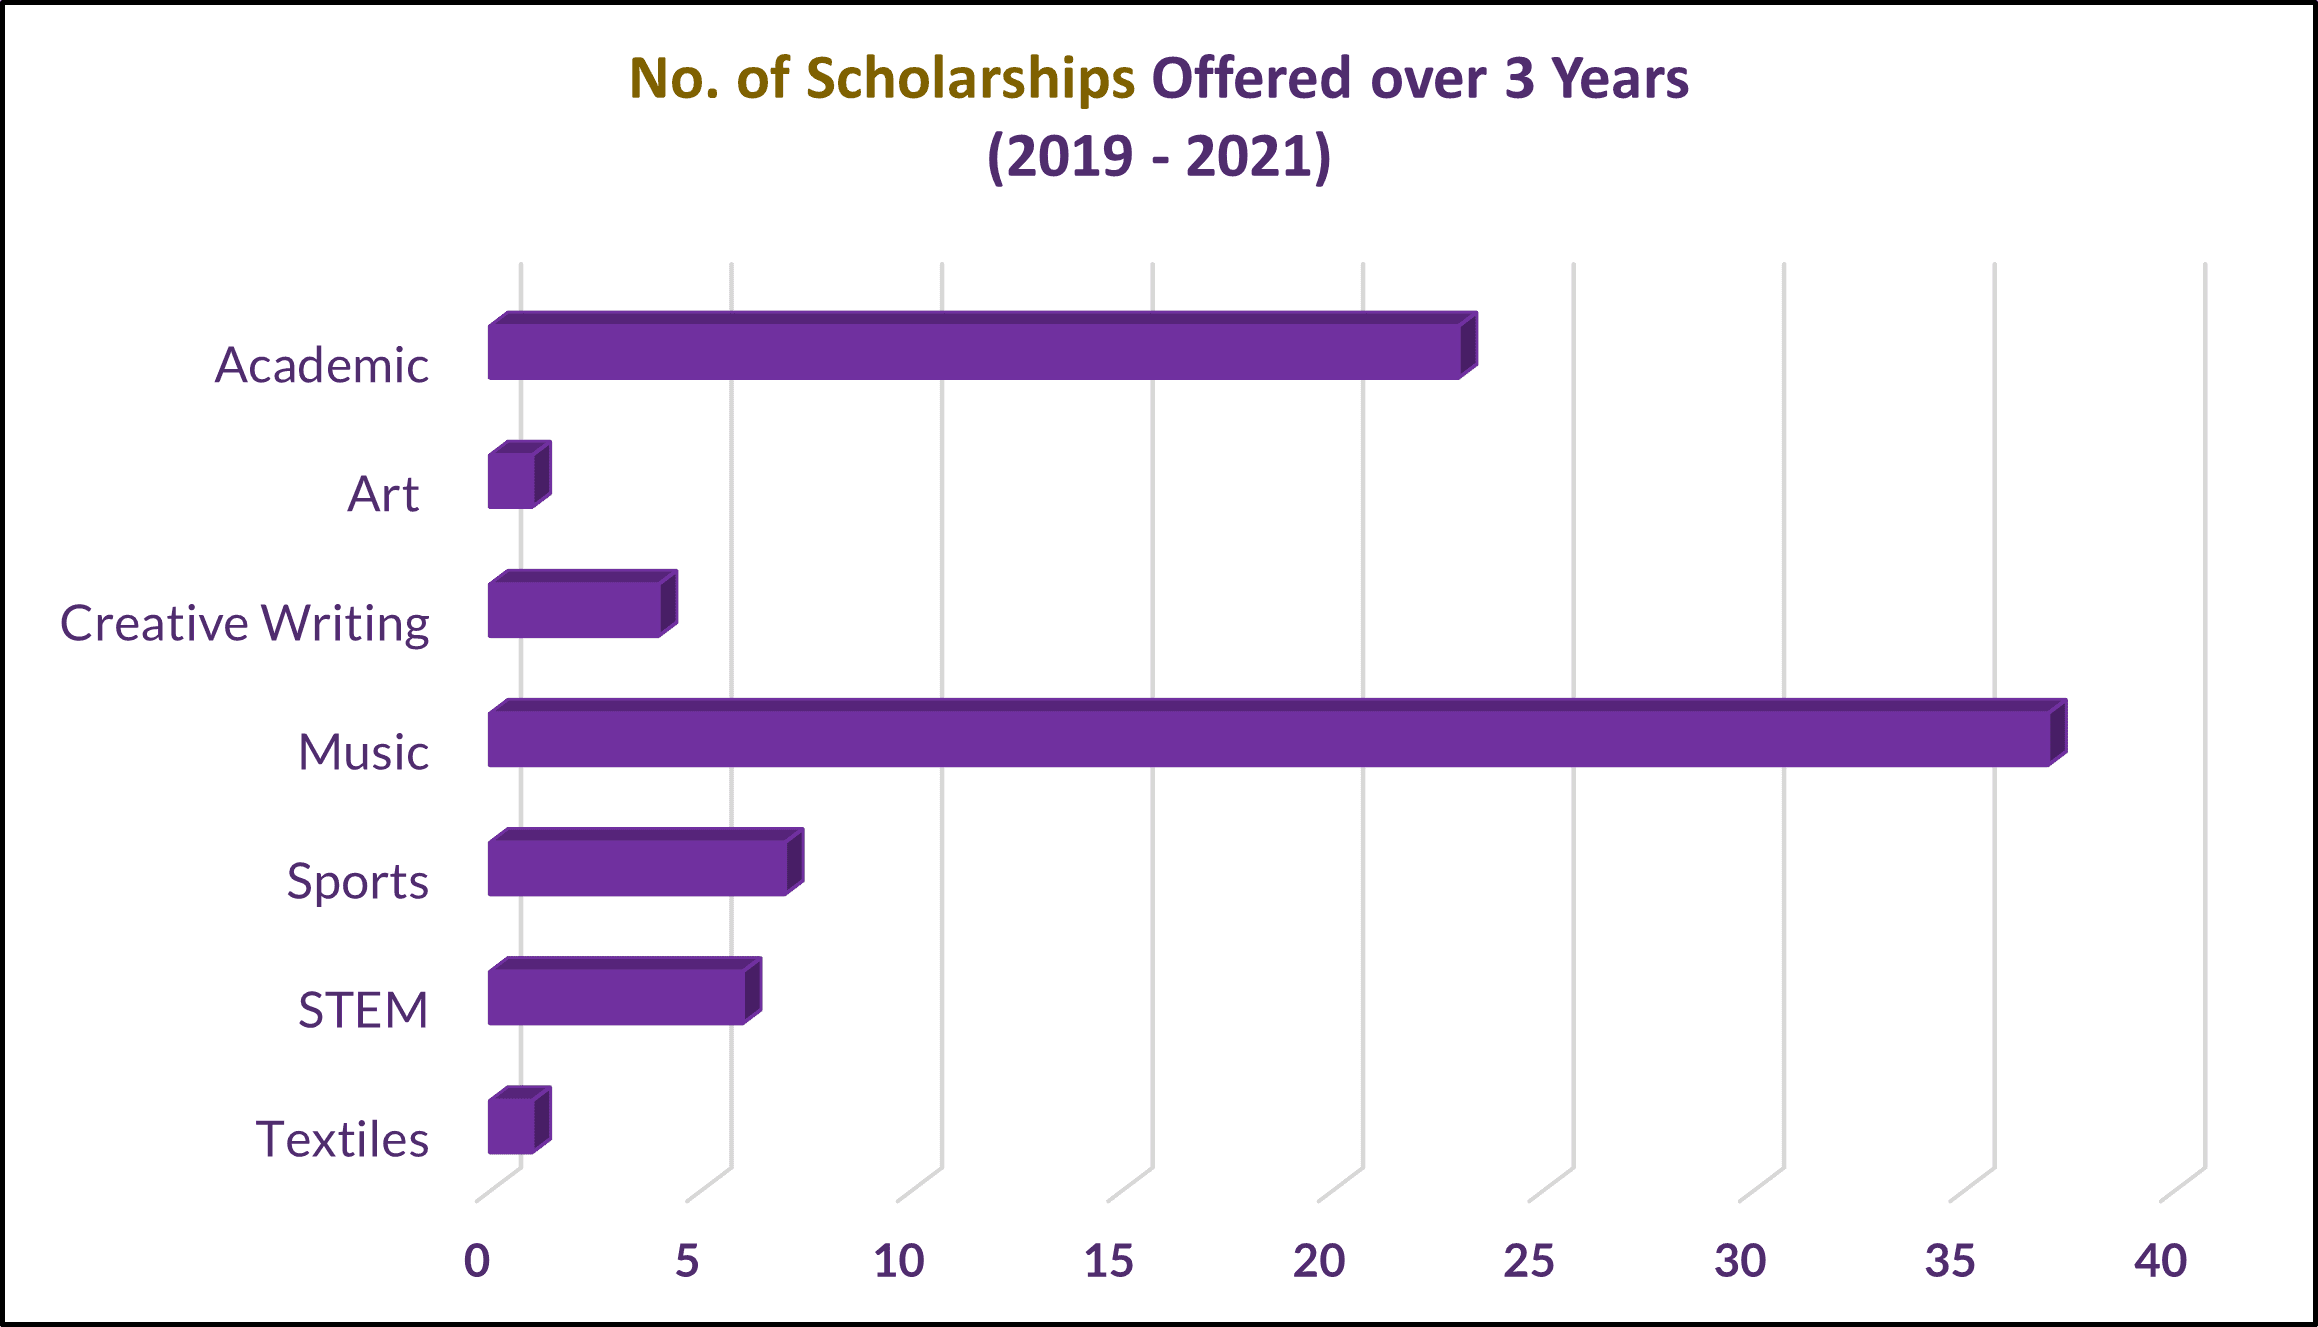 No of Scholarships Offered over 3 Years (2019-2021)